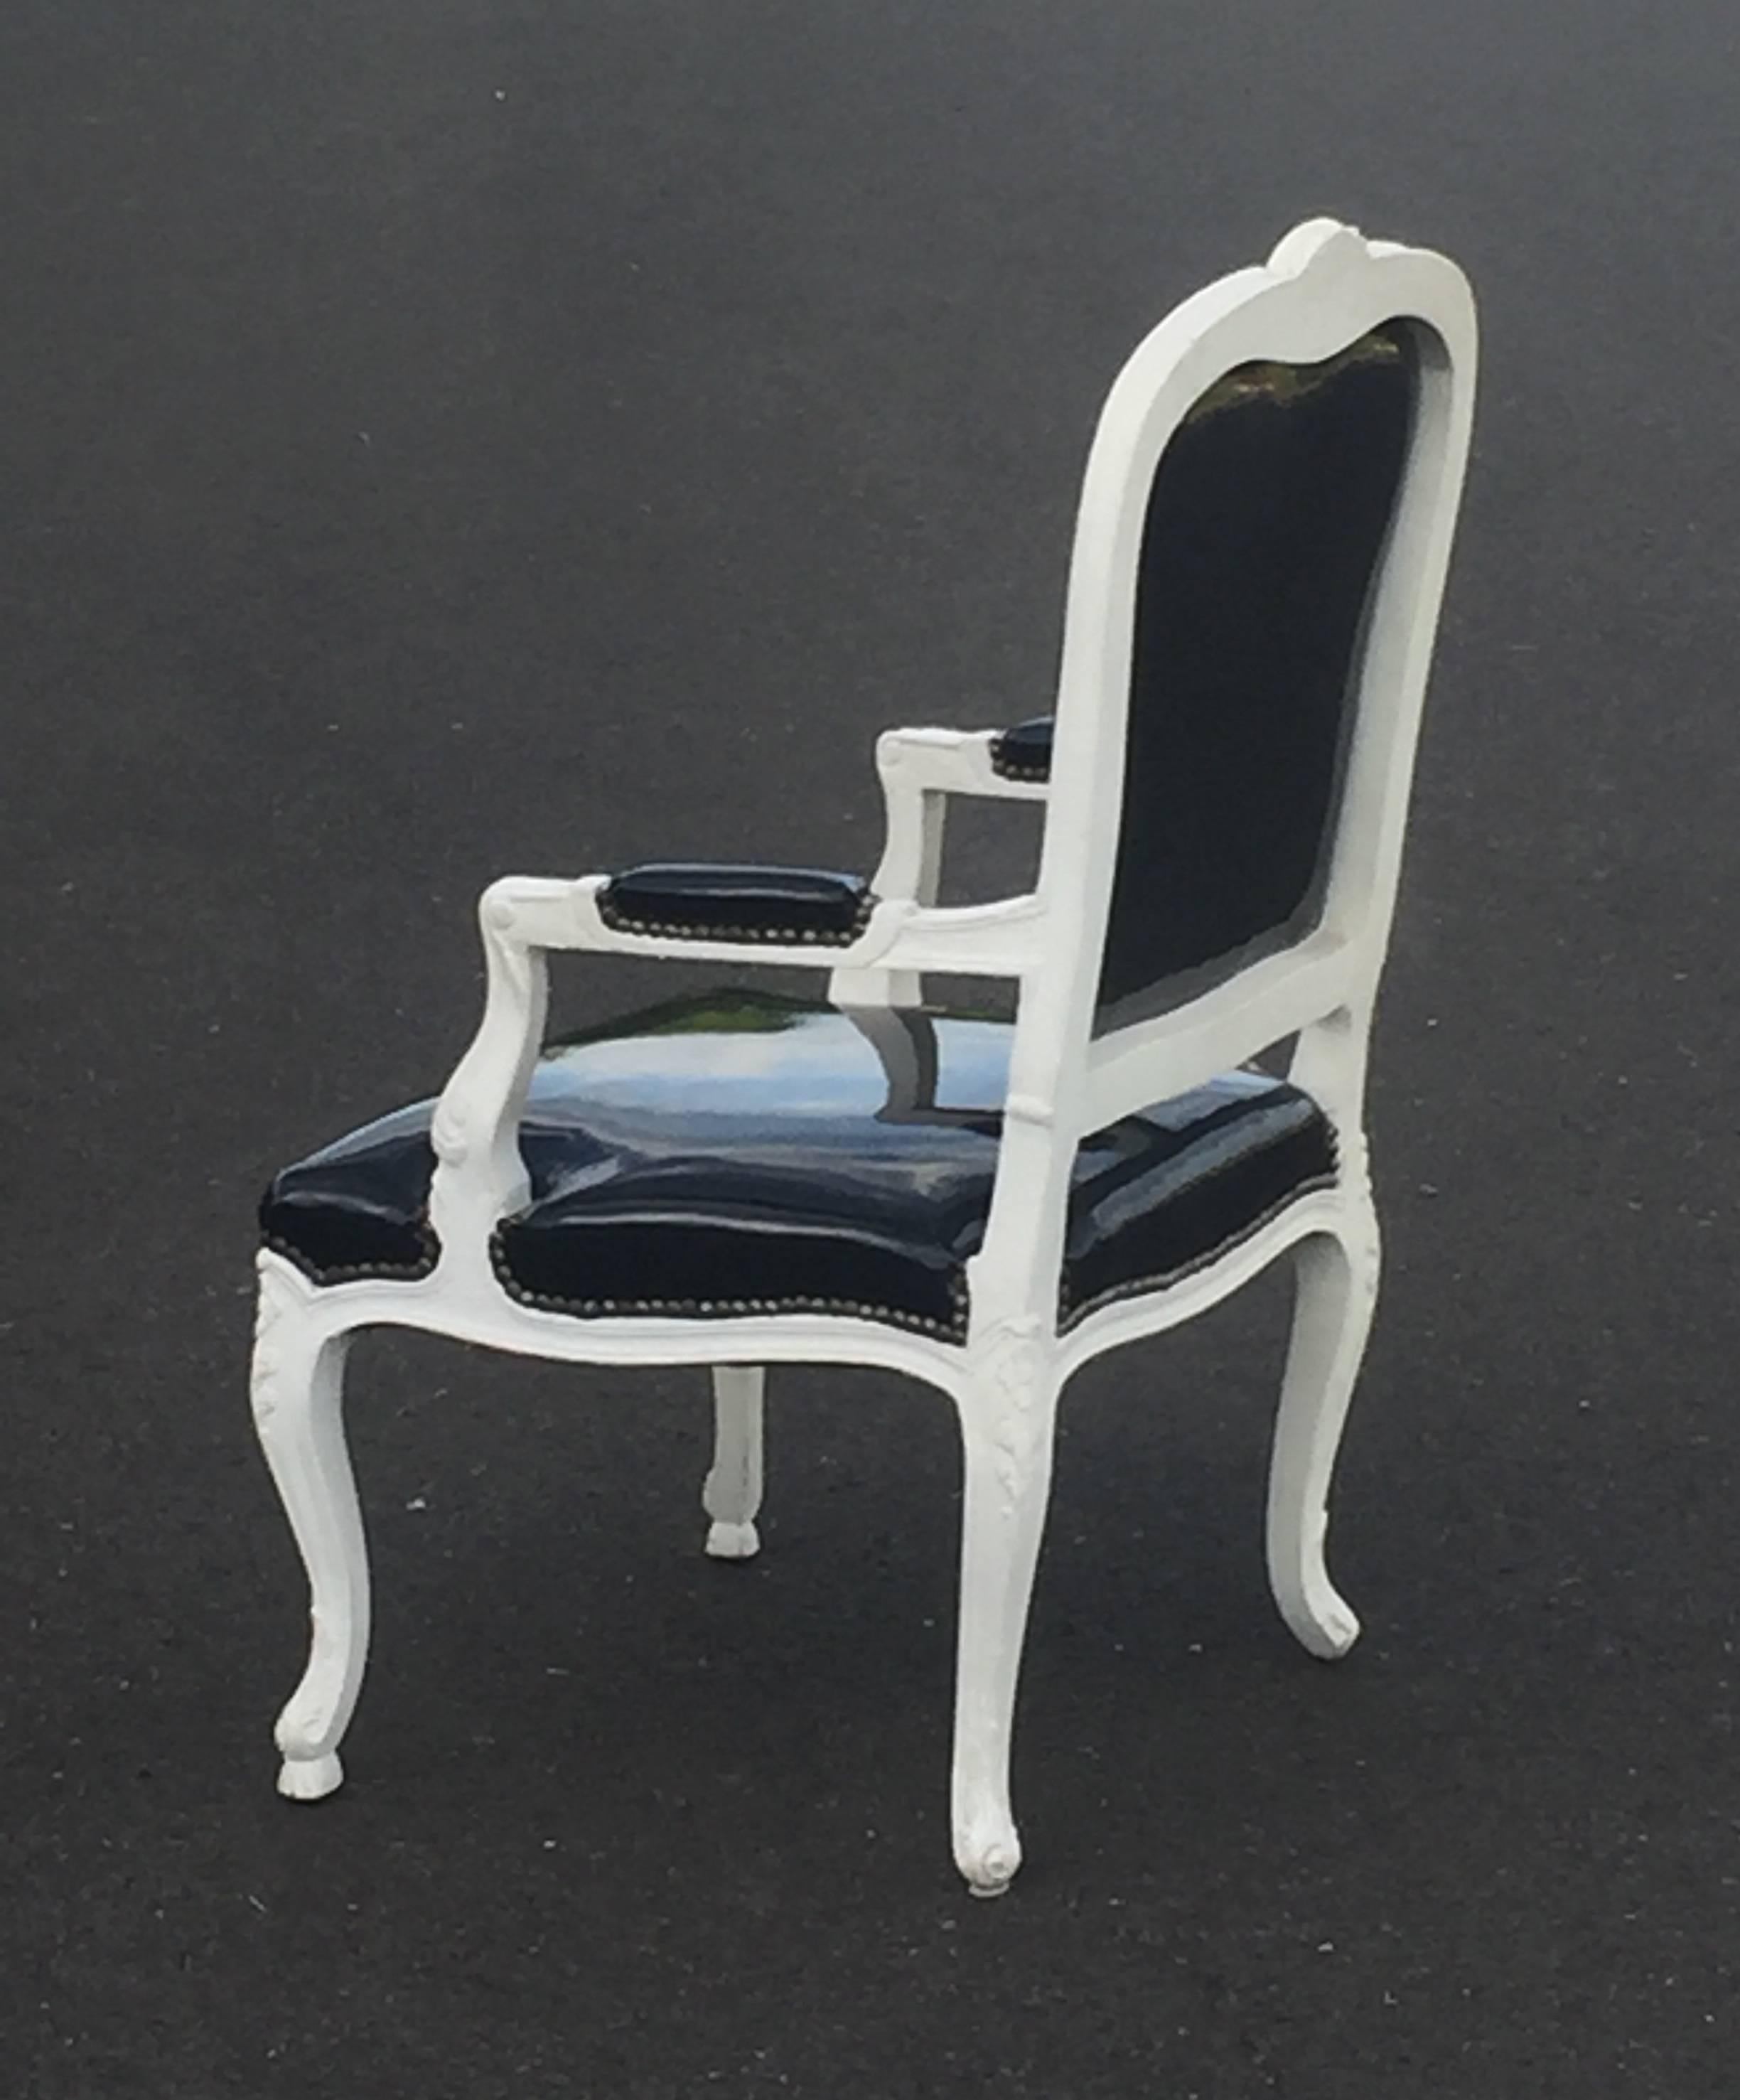 Louis XVI Sassy French Style Arm Chair with Painted Wood Frame and Black Patent Leather